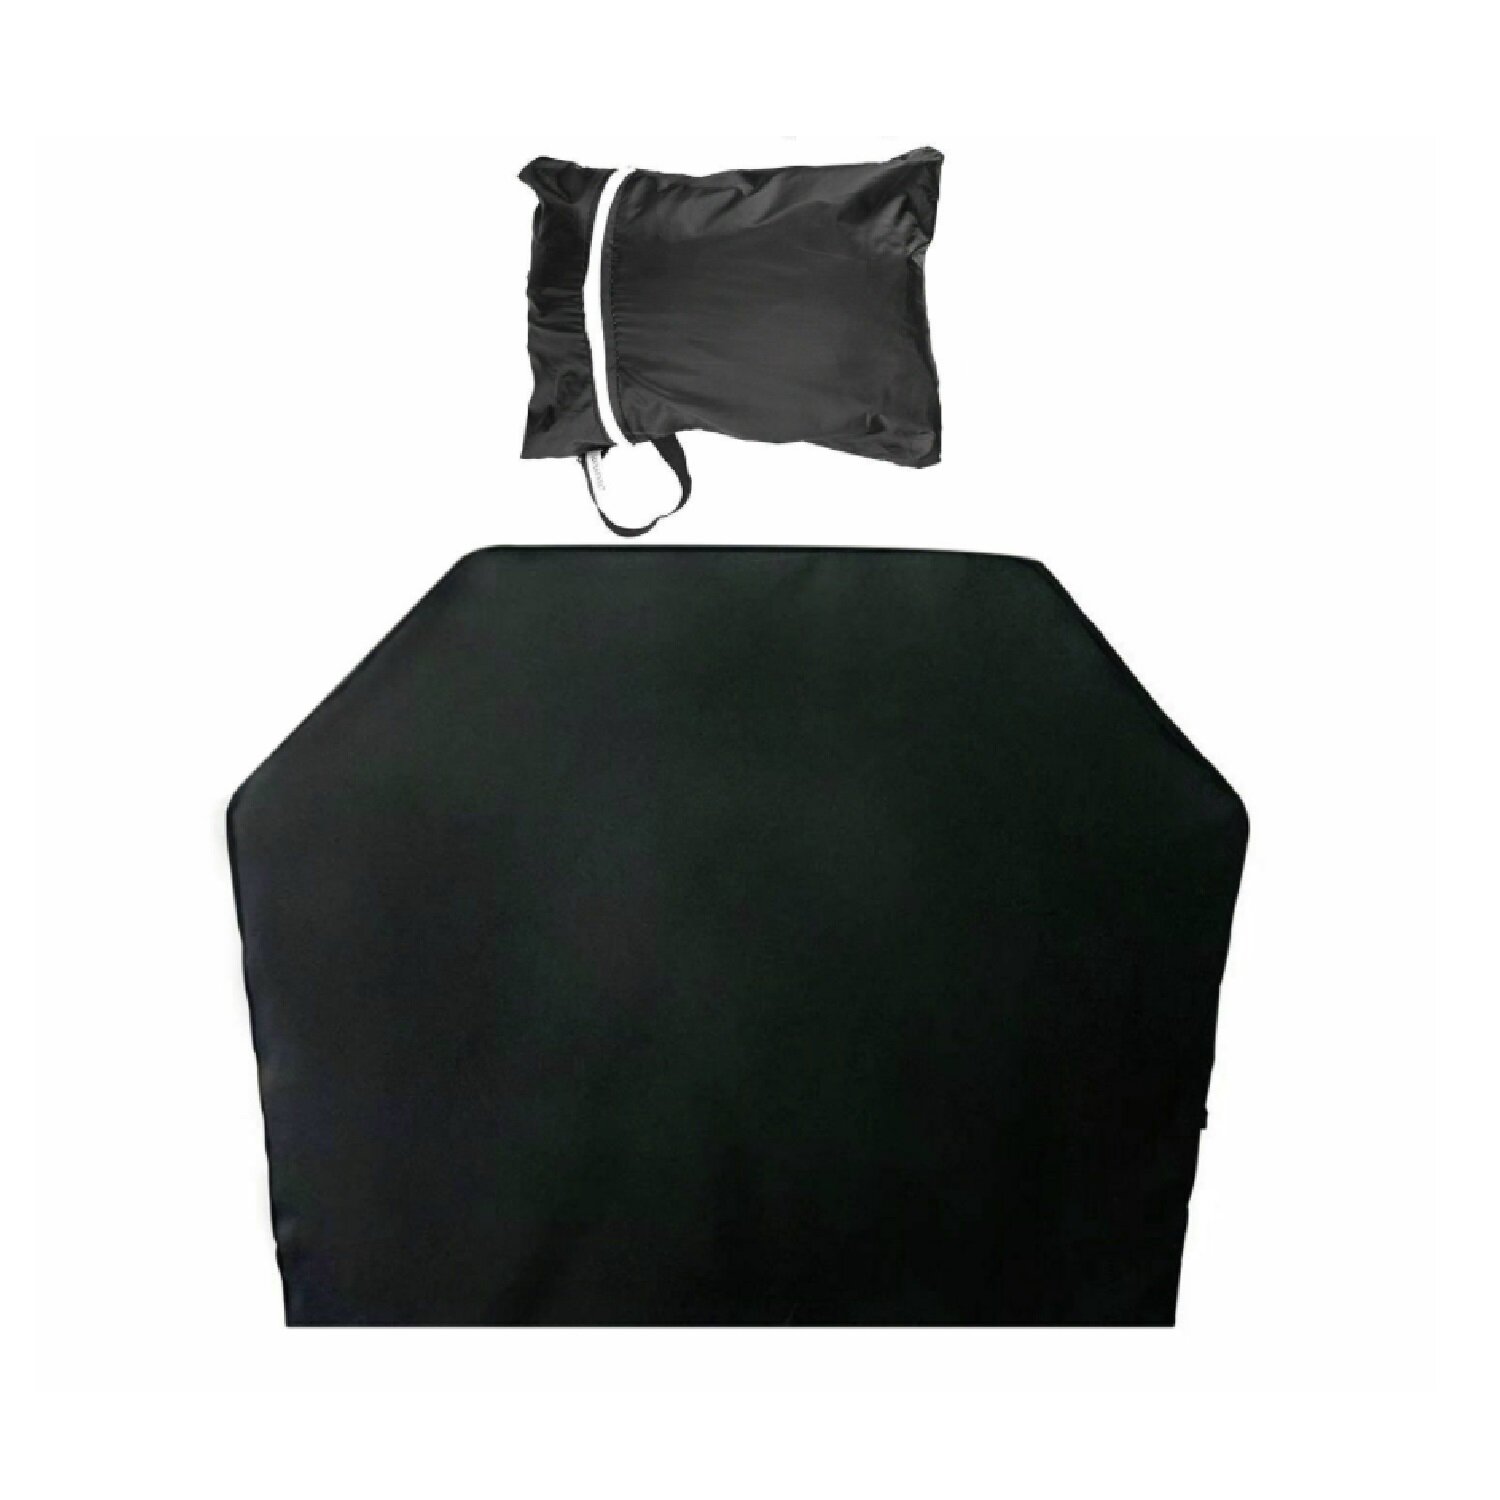 Details about   1x BBQ Gas Grill Cover Barbecue Protection Waterproof Outdoor Heavy Duty Tools 